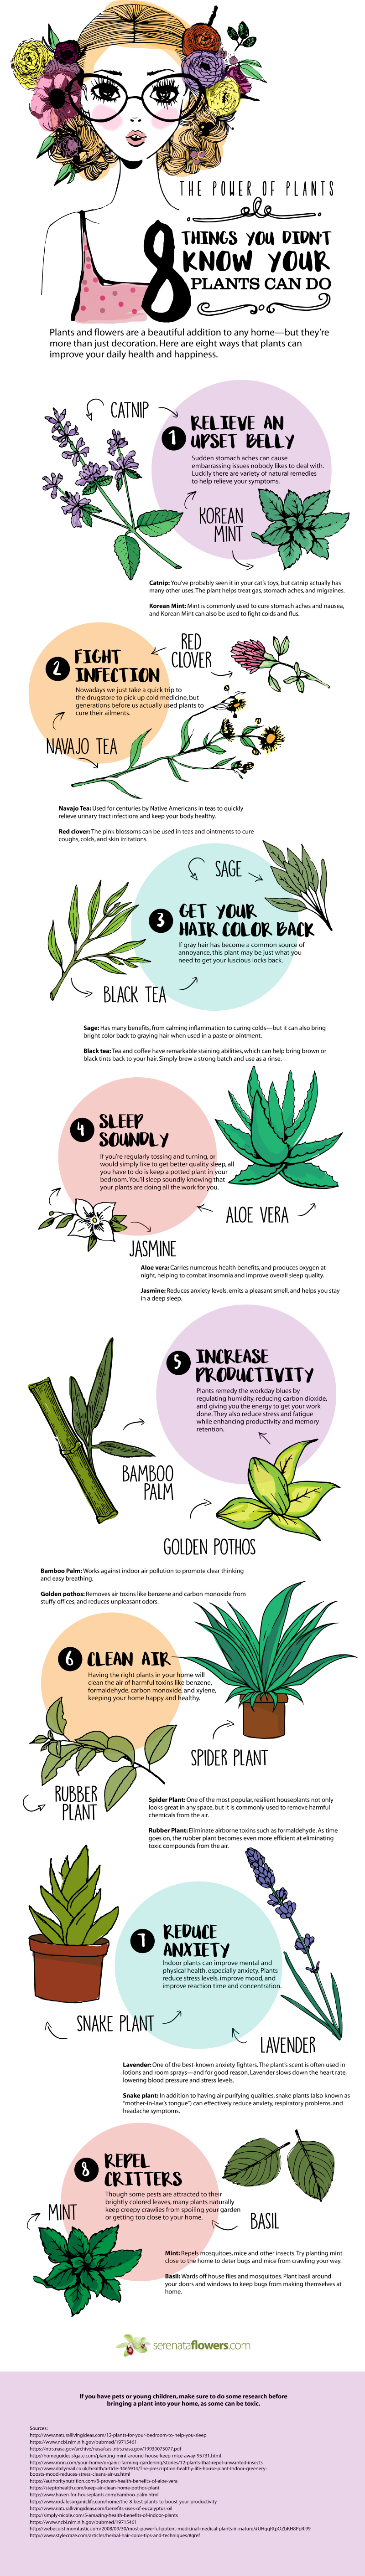 https://blog.serenataflowers.com/pollennation/wp-content/uploads/2017/02/8-things-you-didnt-know-your-plants-can-do_infographic.jpg